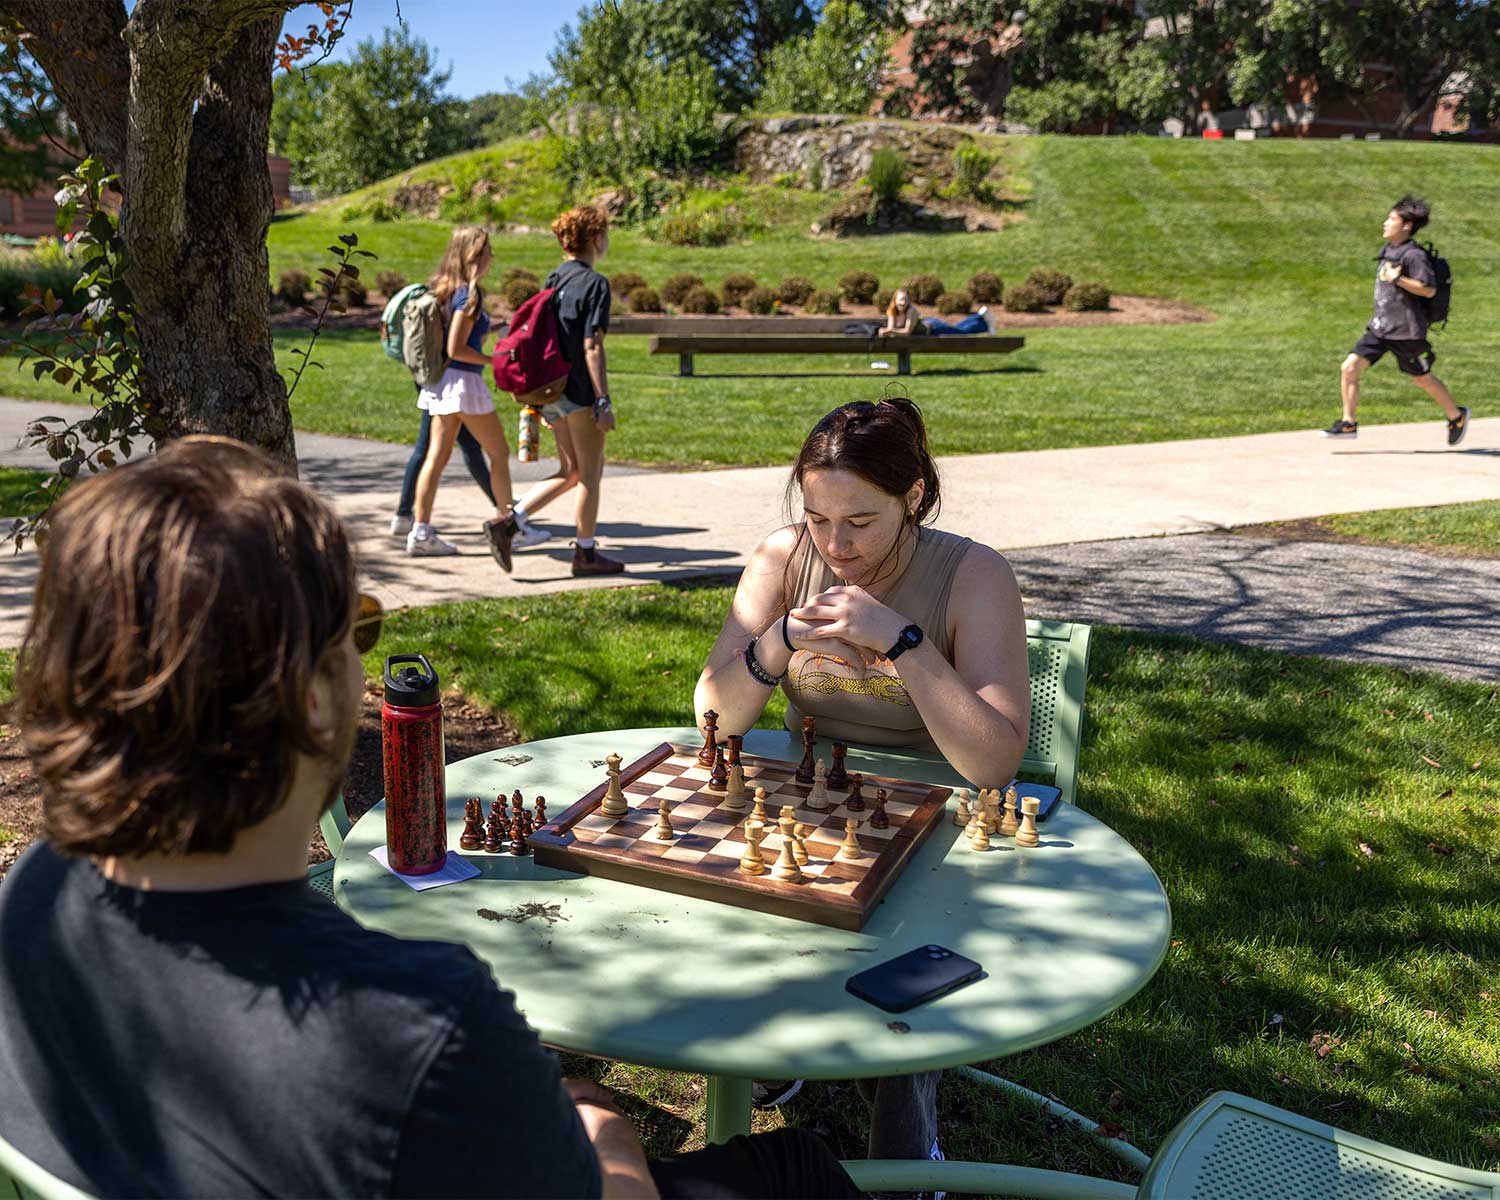 Two students play chess on a table beneath a tree.